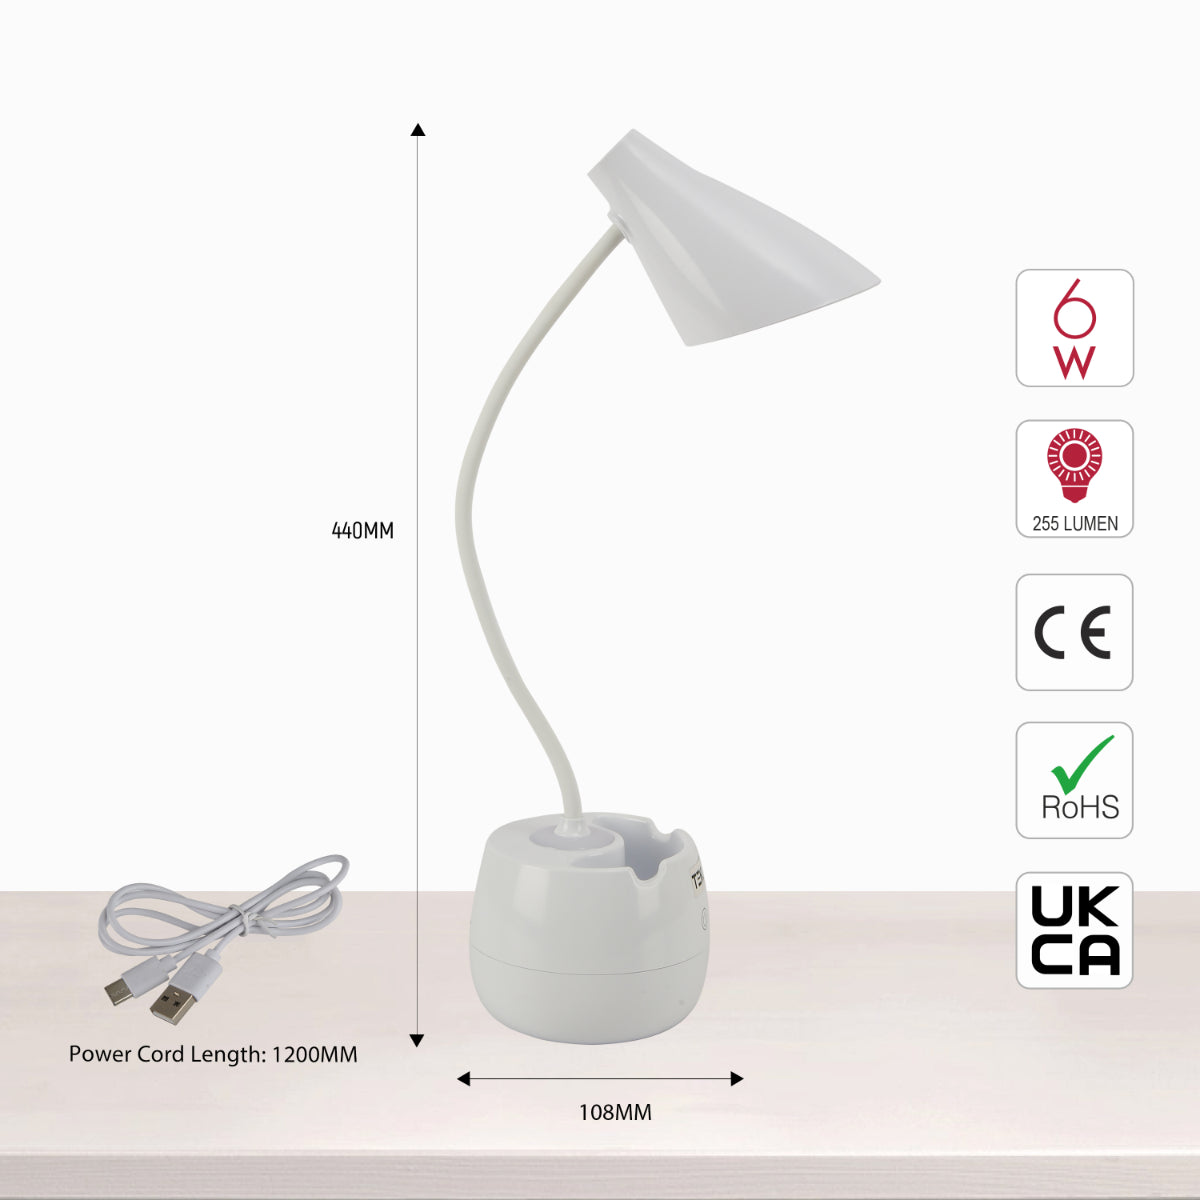 Size and certifications of Rechargeable Gooseneck Desk Lamp with Cone Head and Pencil Holder 130-03761